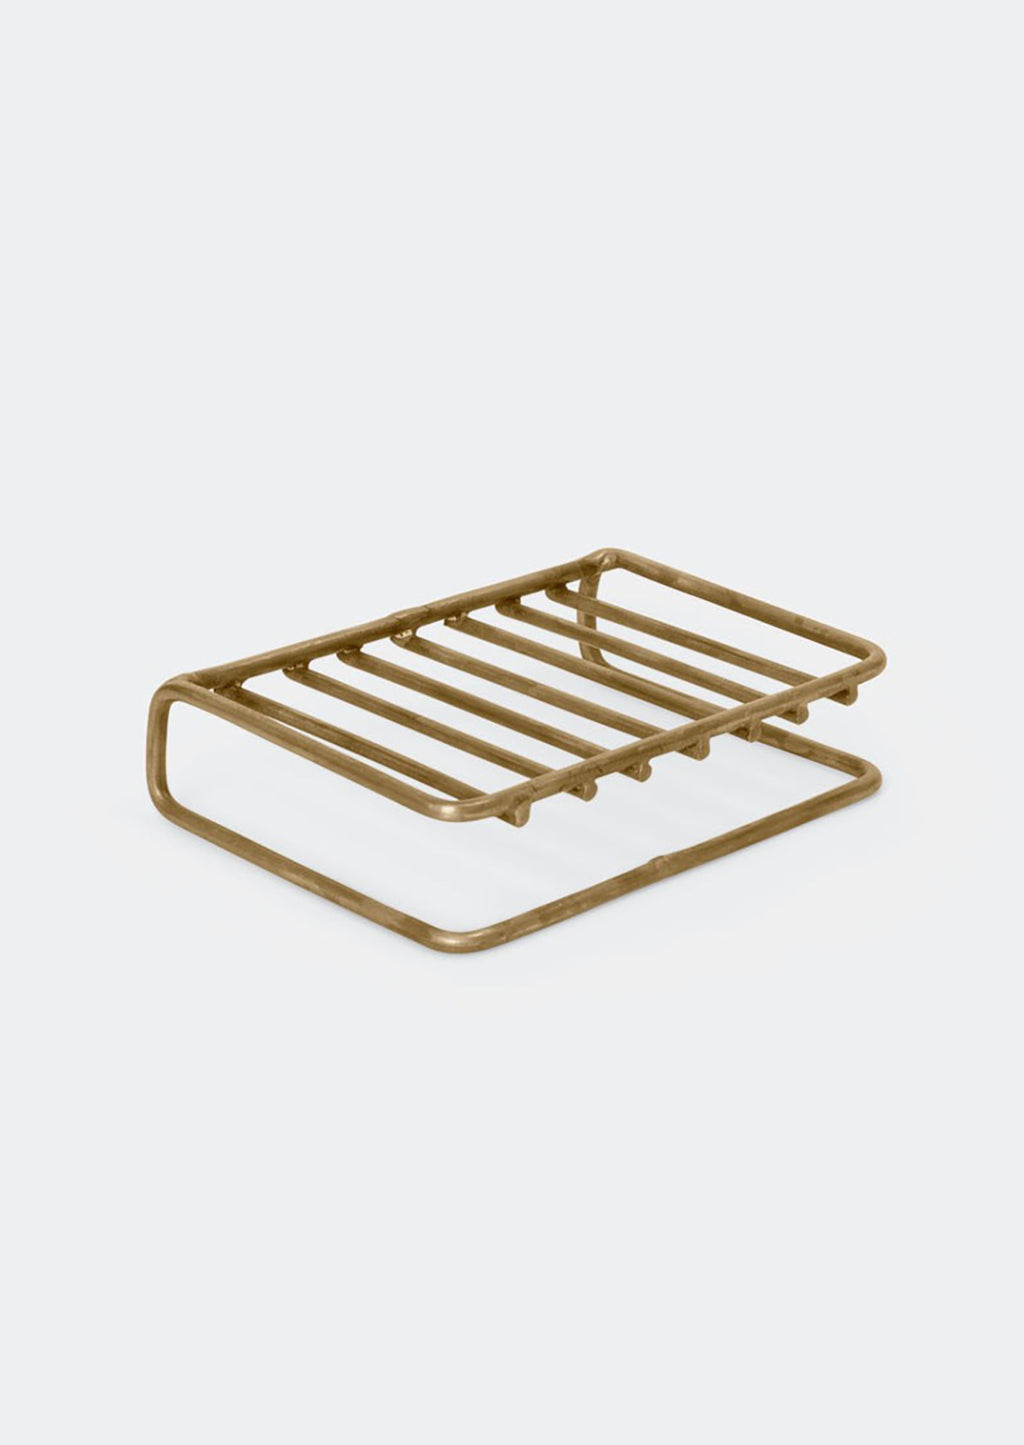 1: A wire brass soap stand.